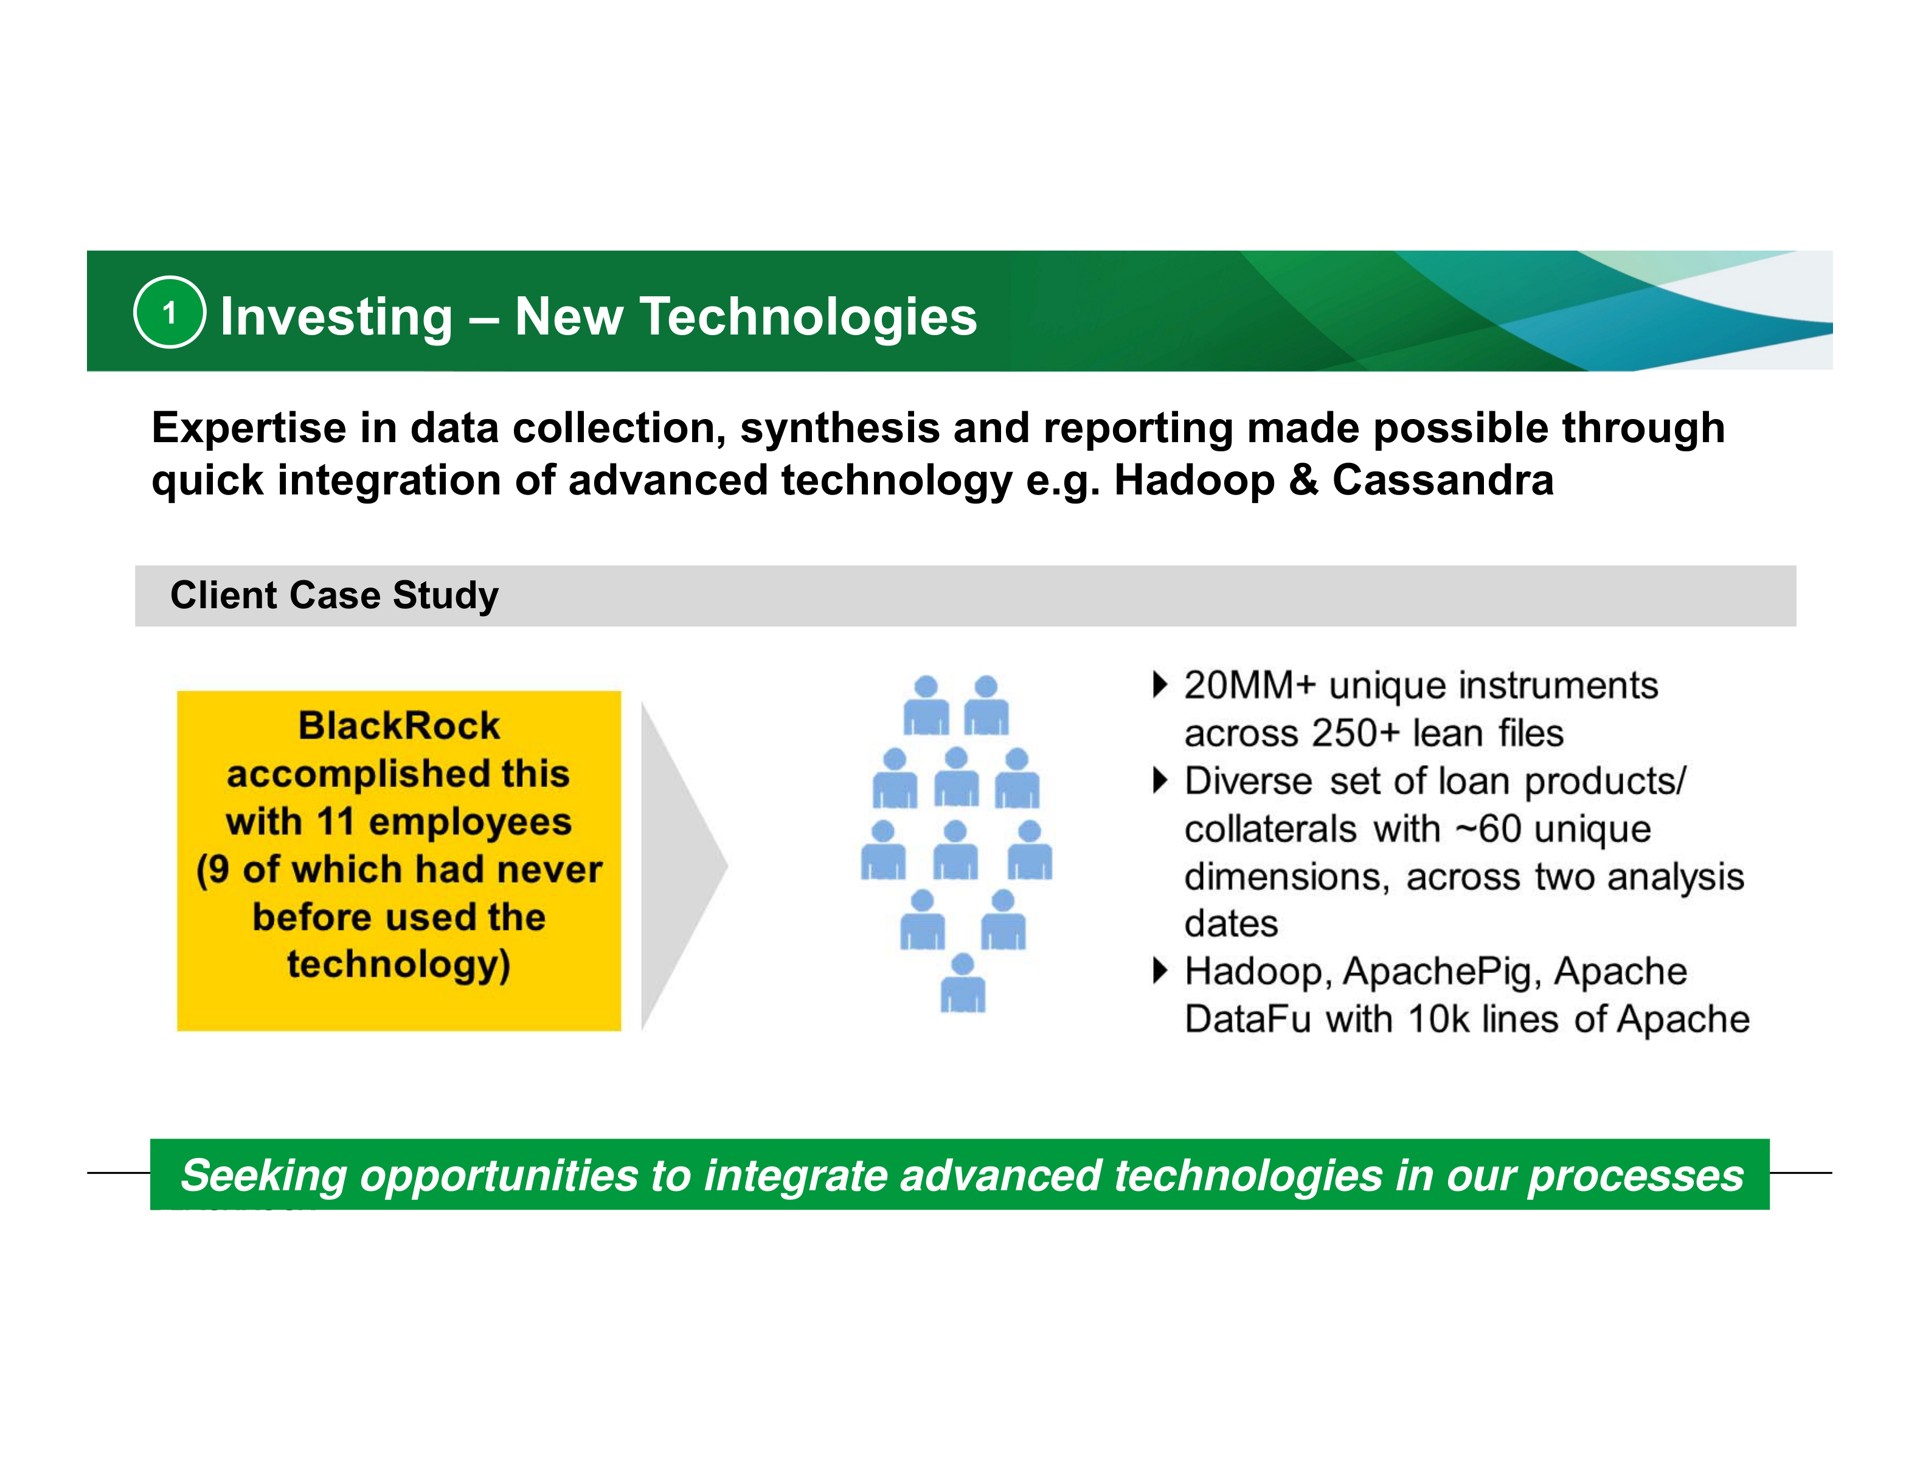 investing new technologies in data collection synthesis and reporting made possible through quick integration of advanced technology seeking opportunities to integrate advanced technologies in our processes | BlackRock